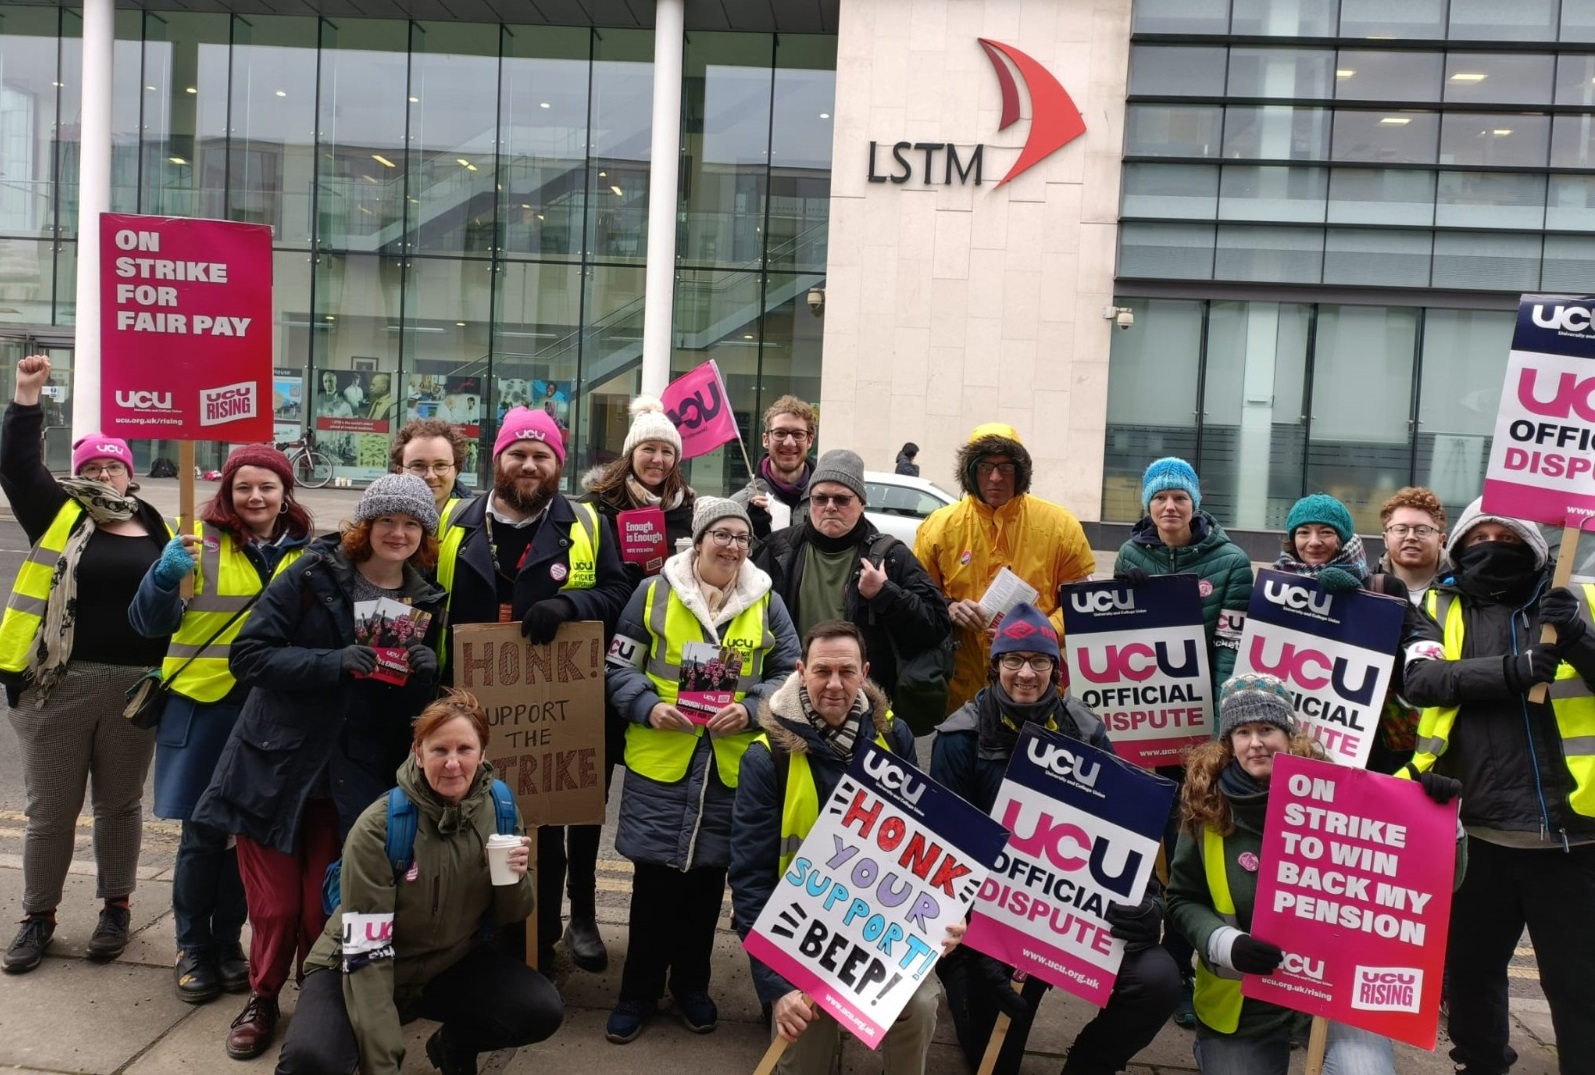 LSTM members picketing outside one of their buildings. They hold placards saying 'on strike to win back my pension', 'on strike for fair pay', and 'Honk your support Beep!'